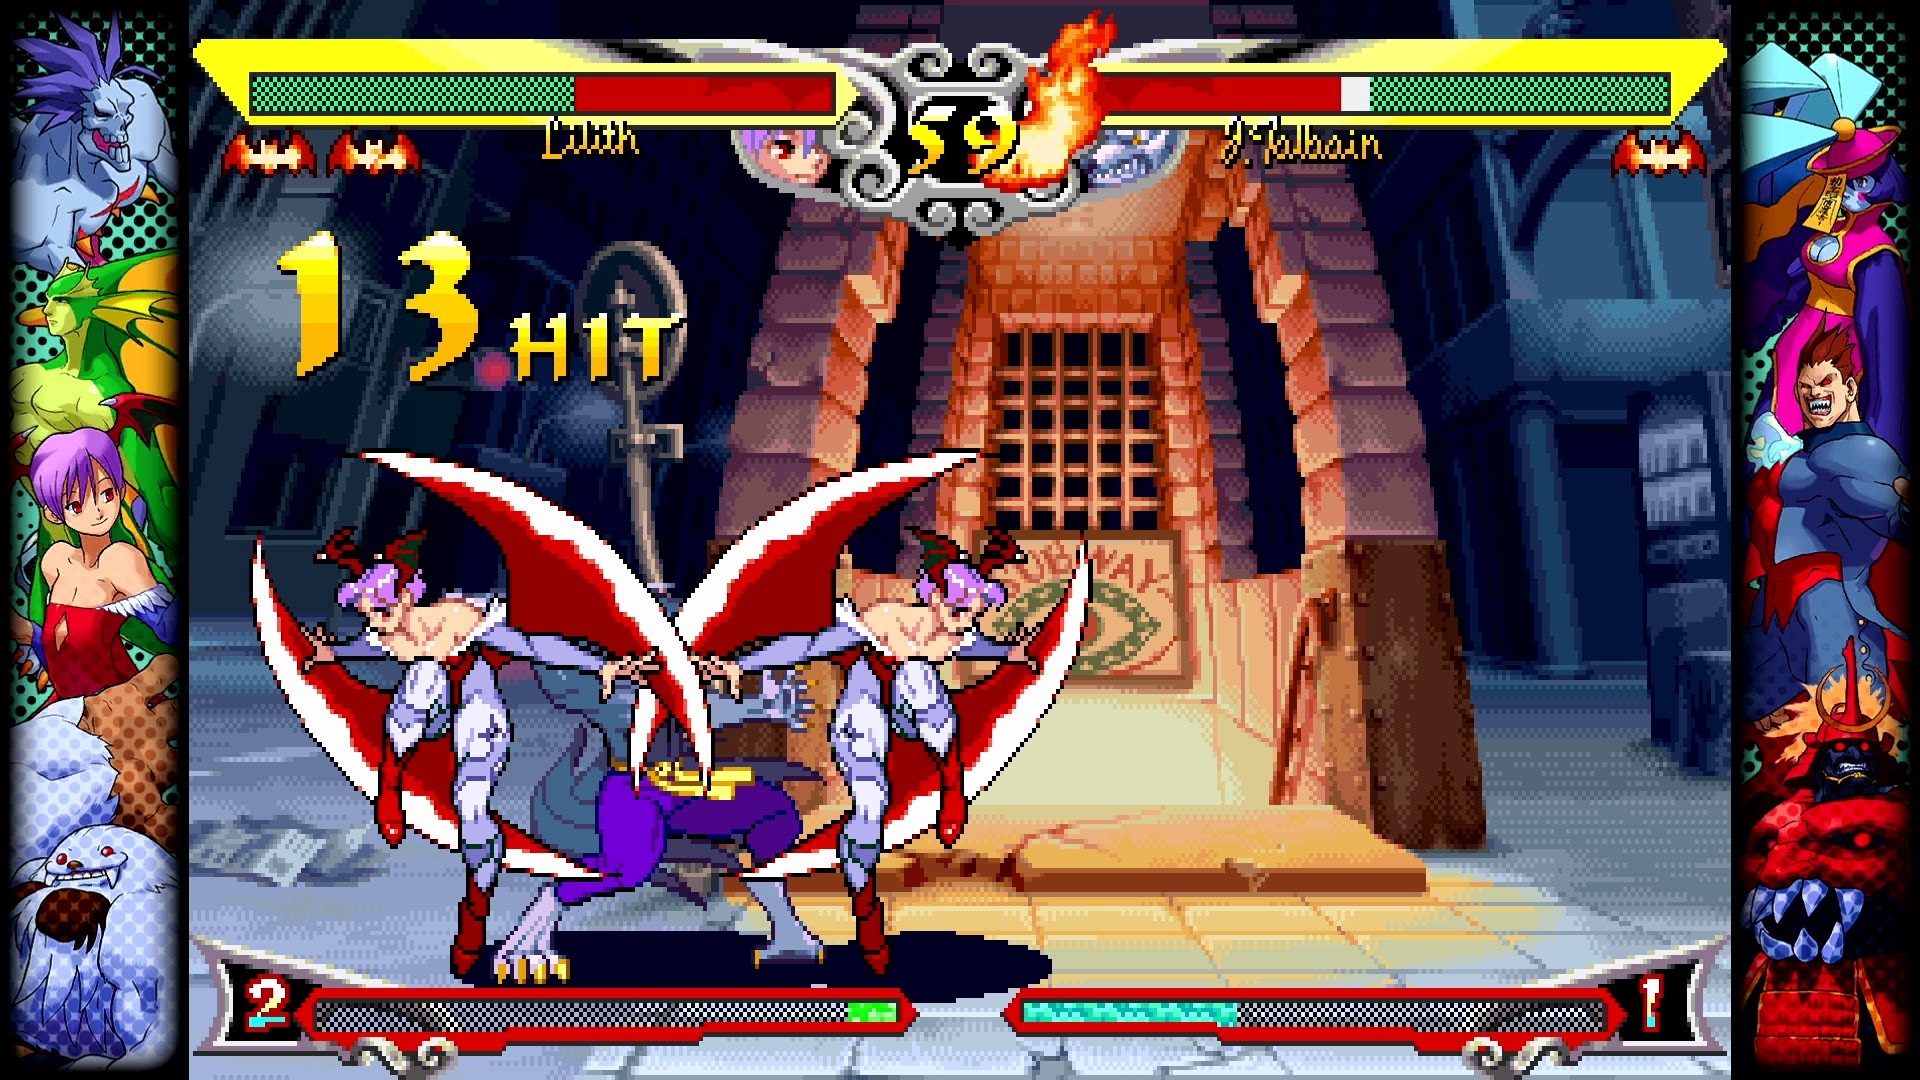 Lilith attacking Talbain with her clone in Darkstalkers.